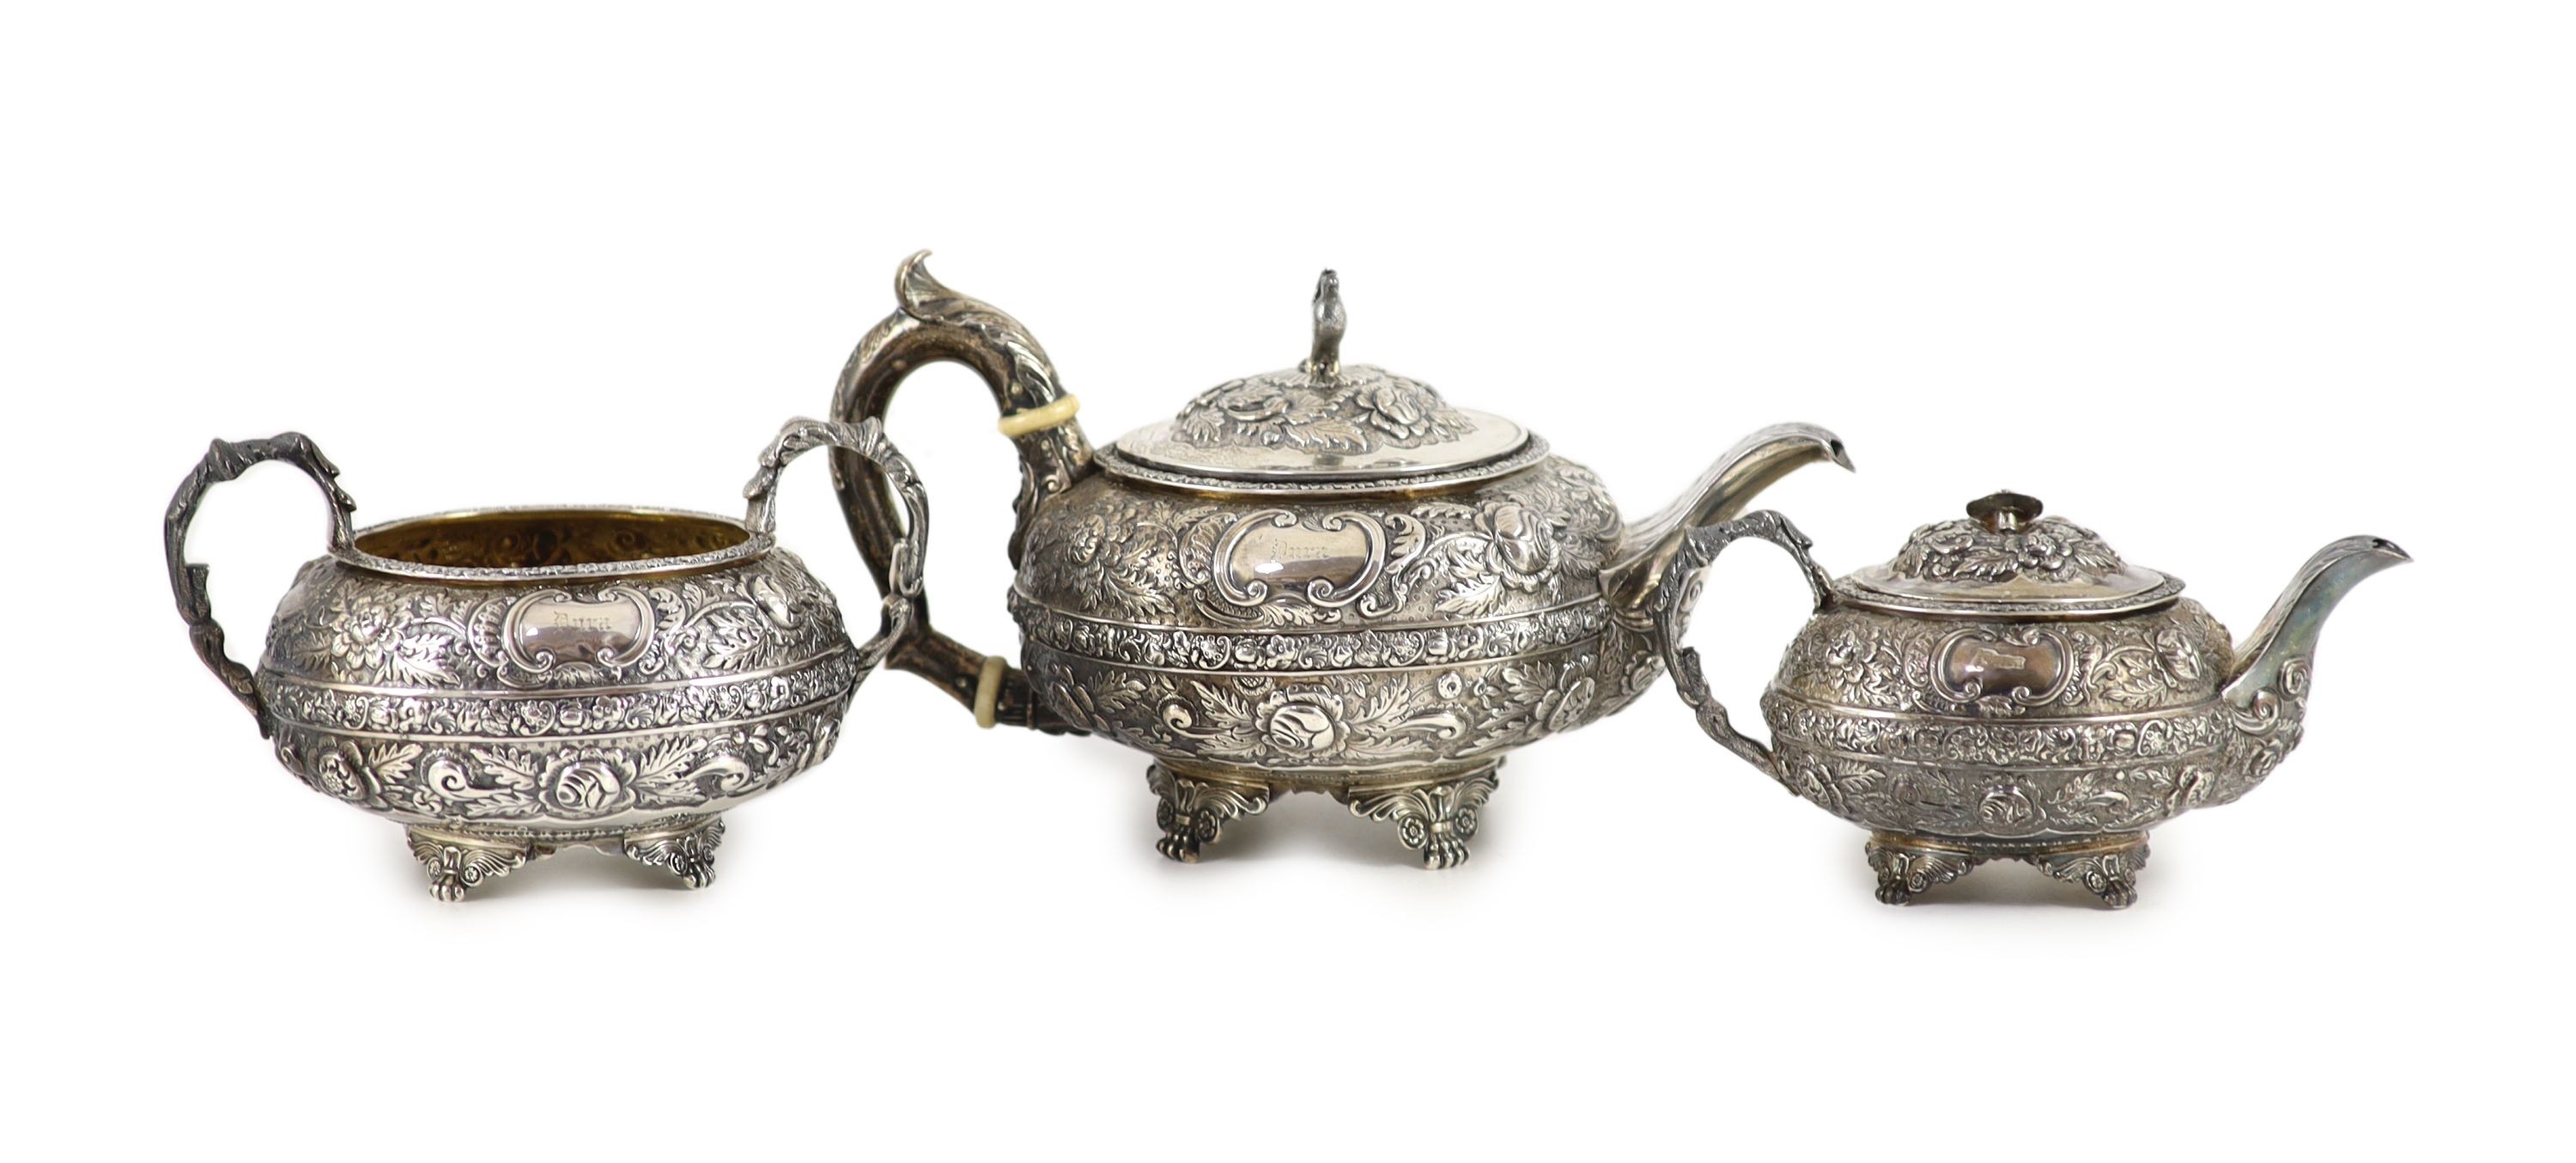 A late George III provincial silver three piece tea set by James Barber & William Whitwell,heavily